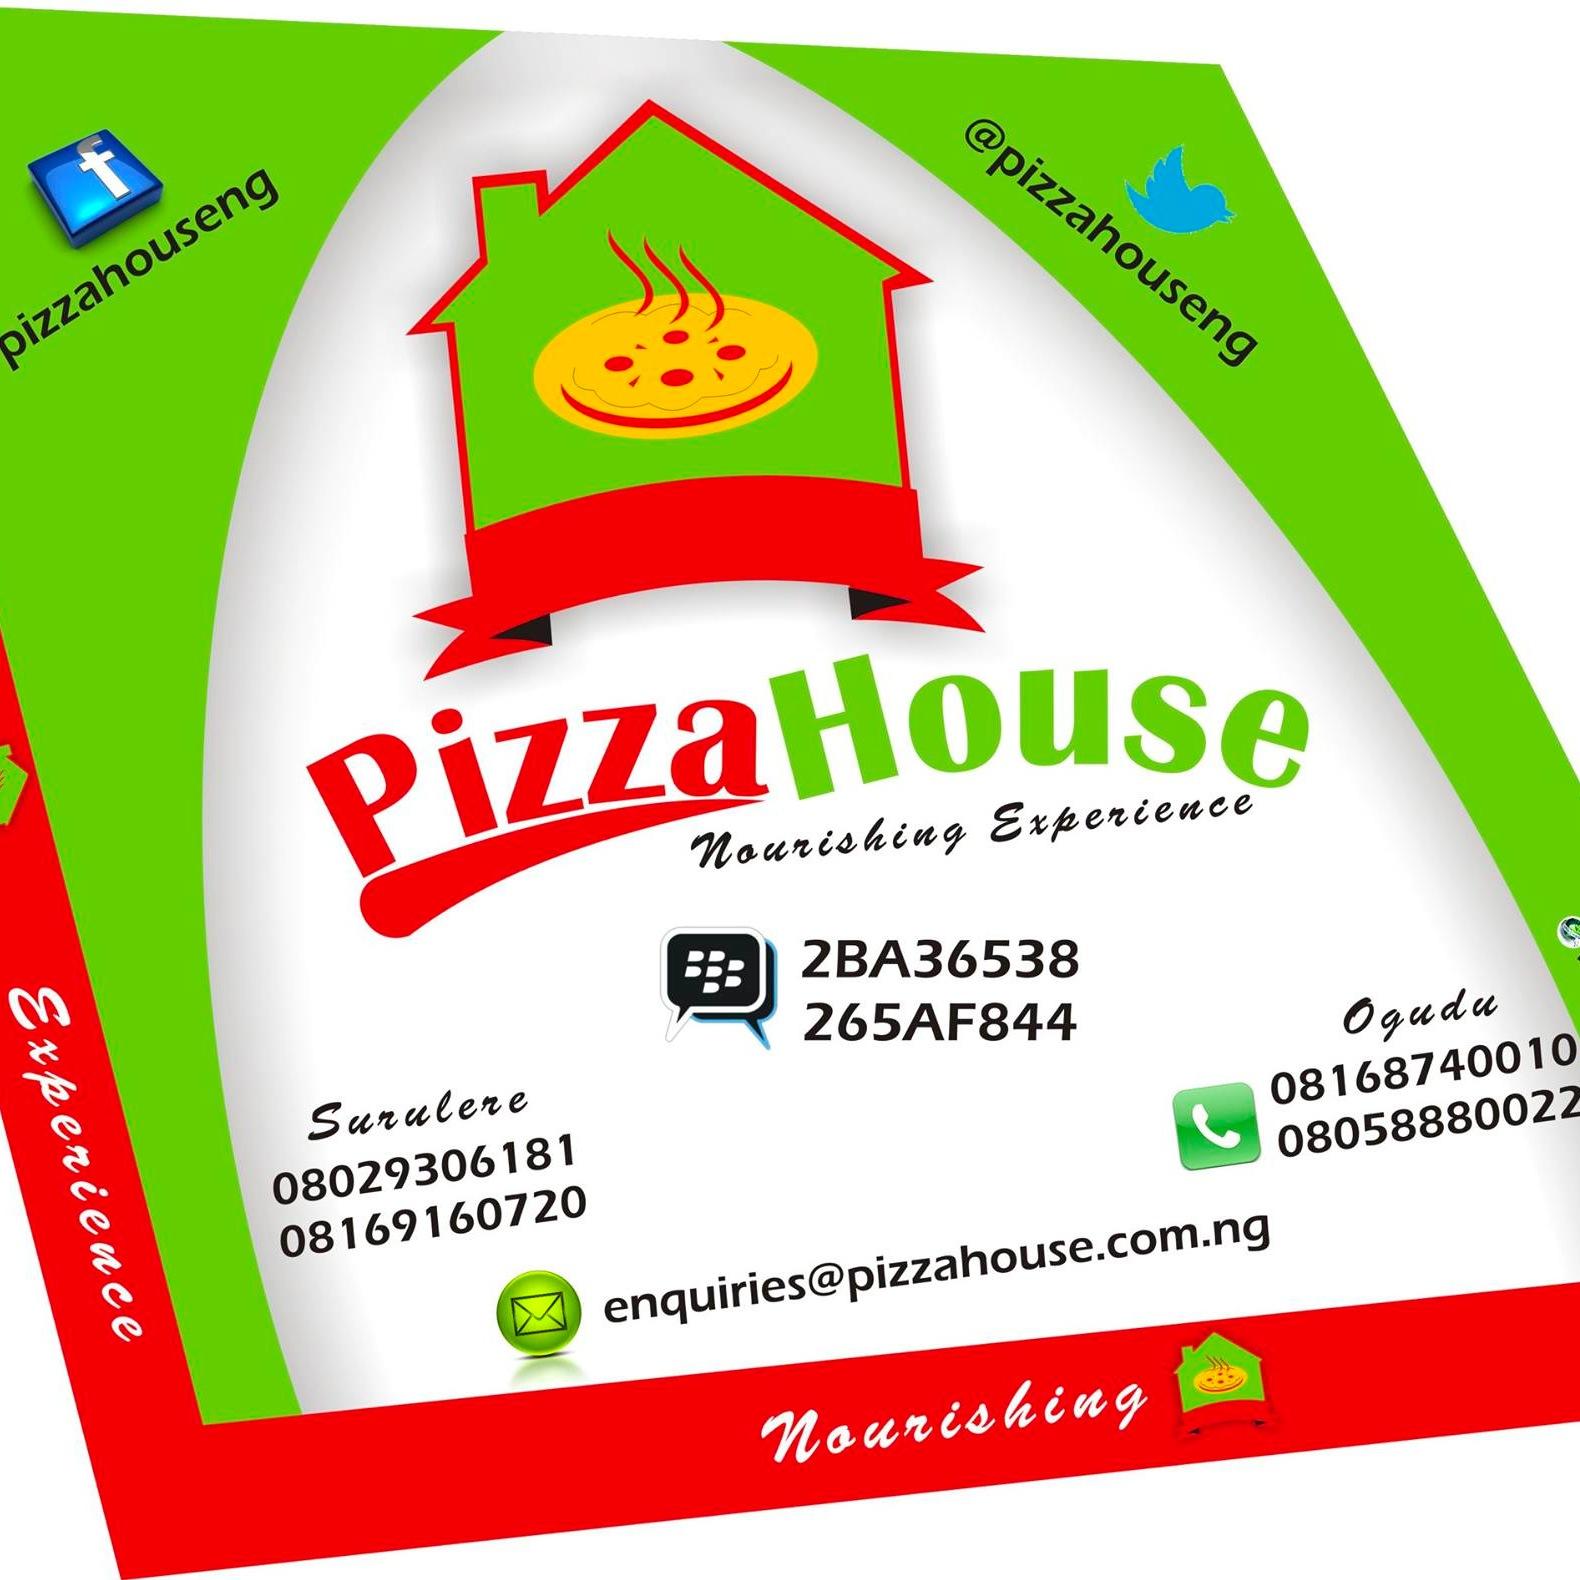 Delicious, Fresh and Hot Pizza. Like our Facebook page https://t.co/Qn7XNua0Ph BB PIN:2BA36538, 265AF844